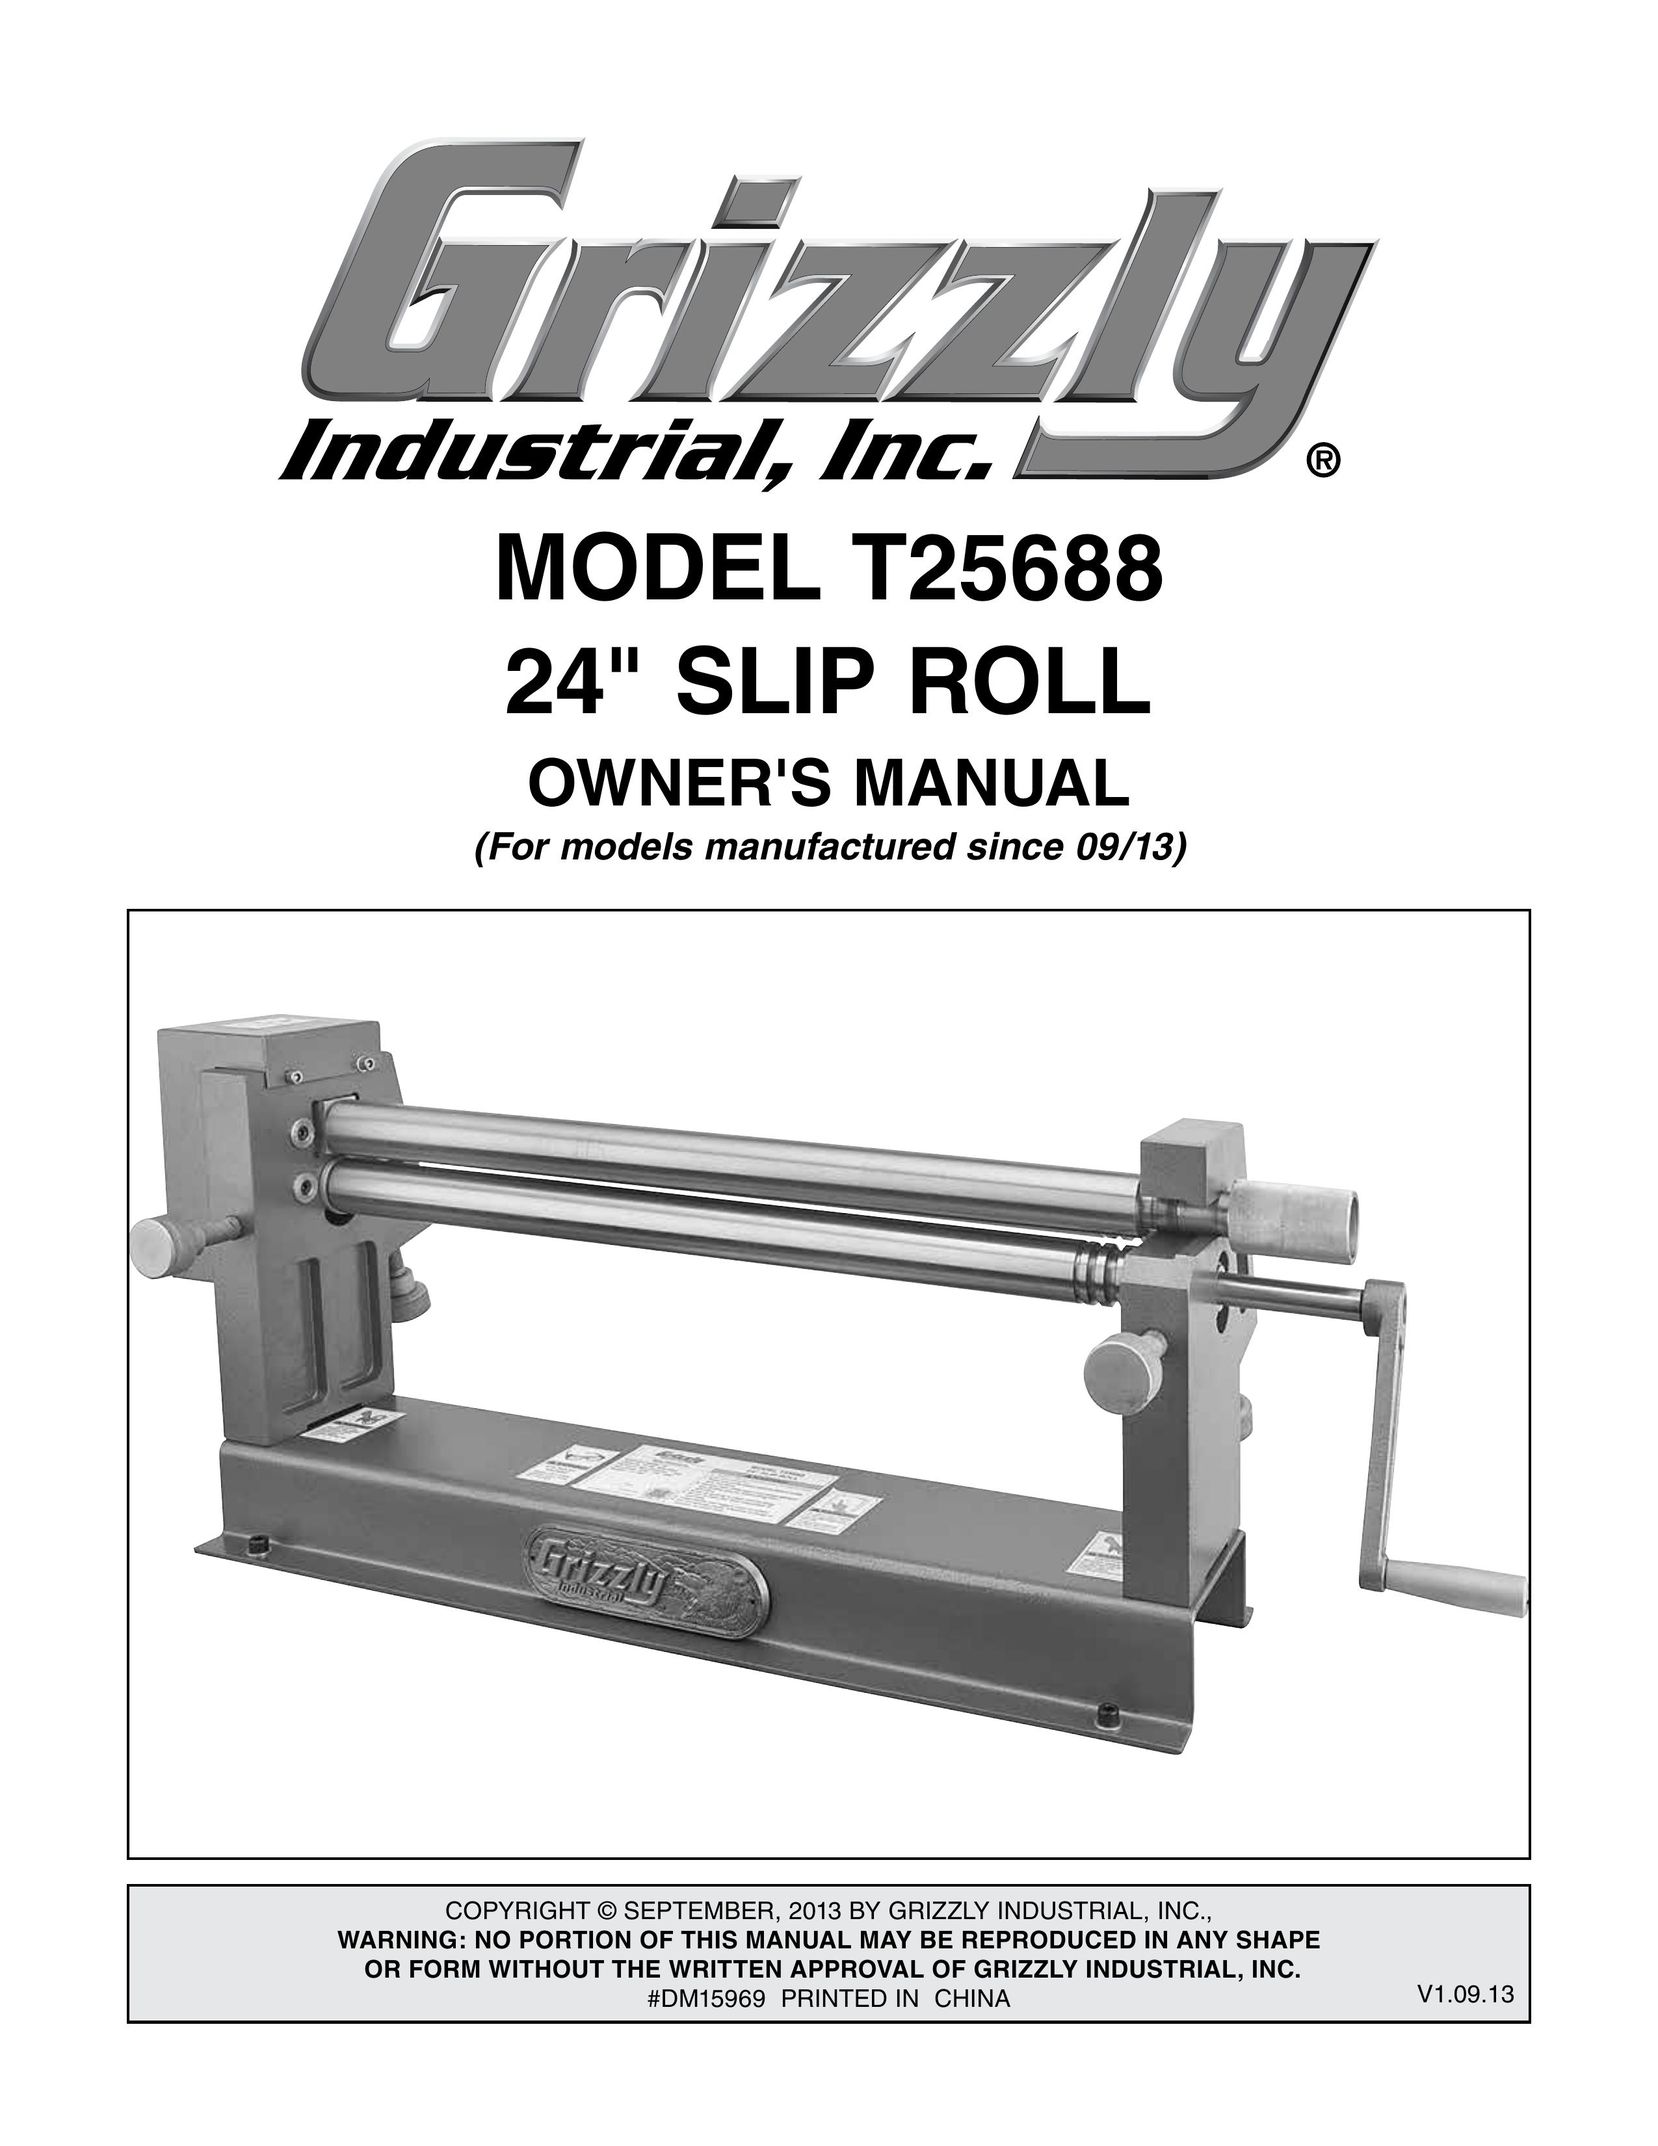 Grizzly T25688 Biscuit Joiner User Manual